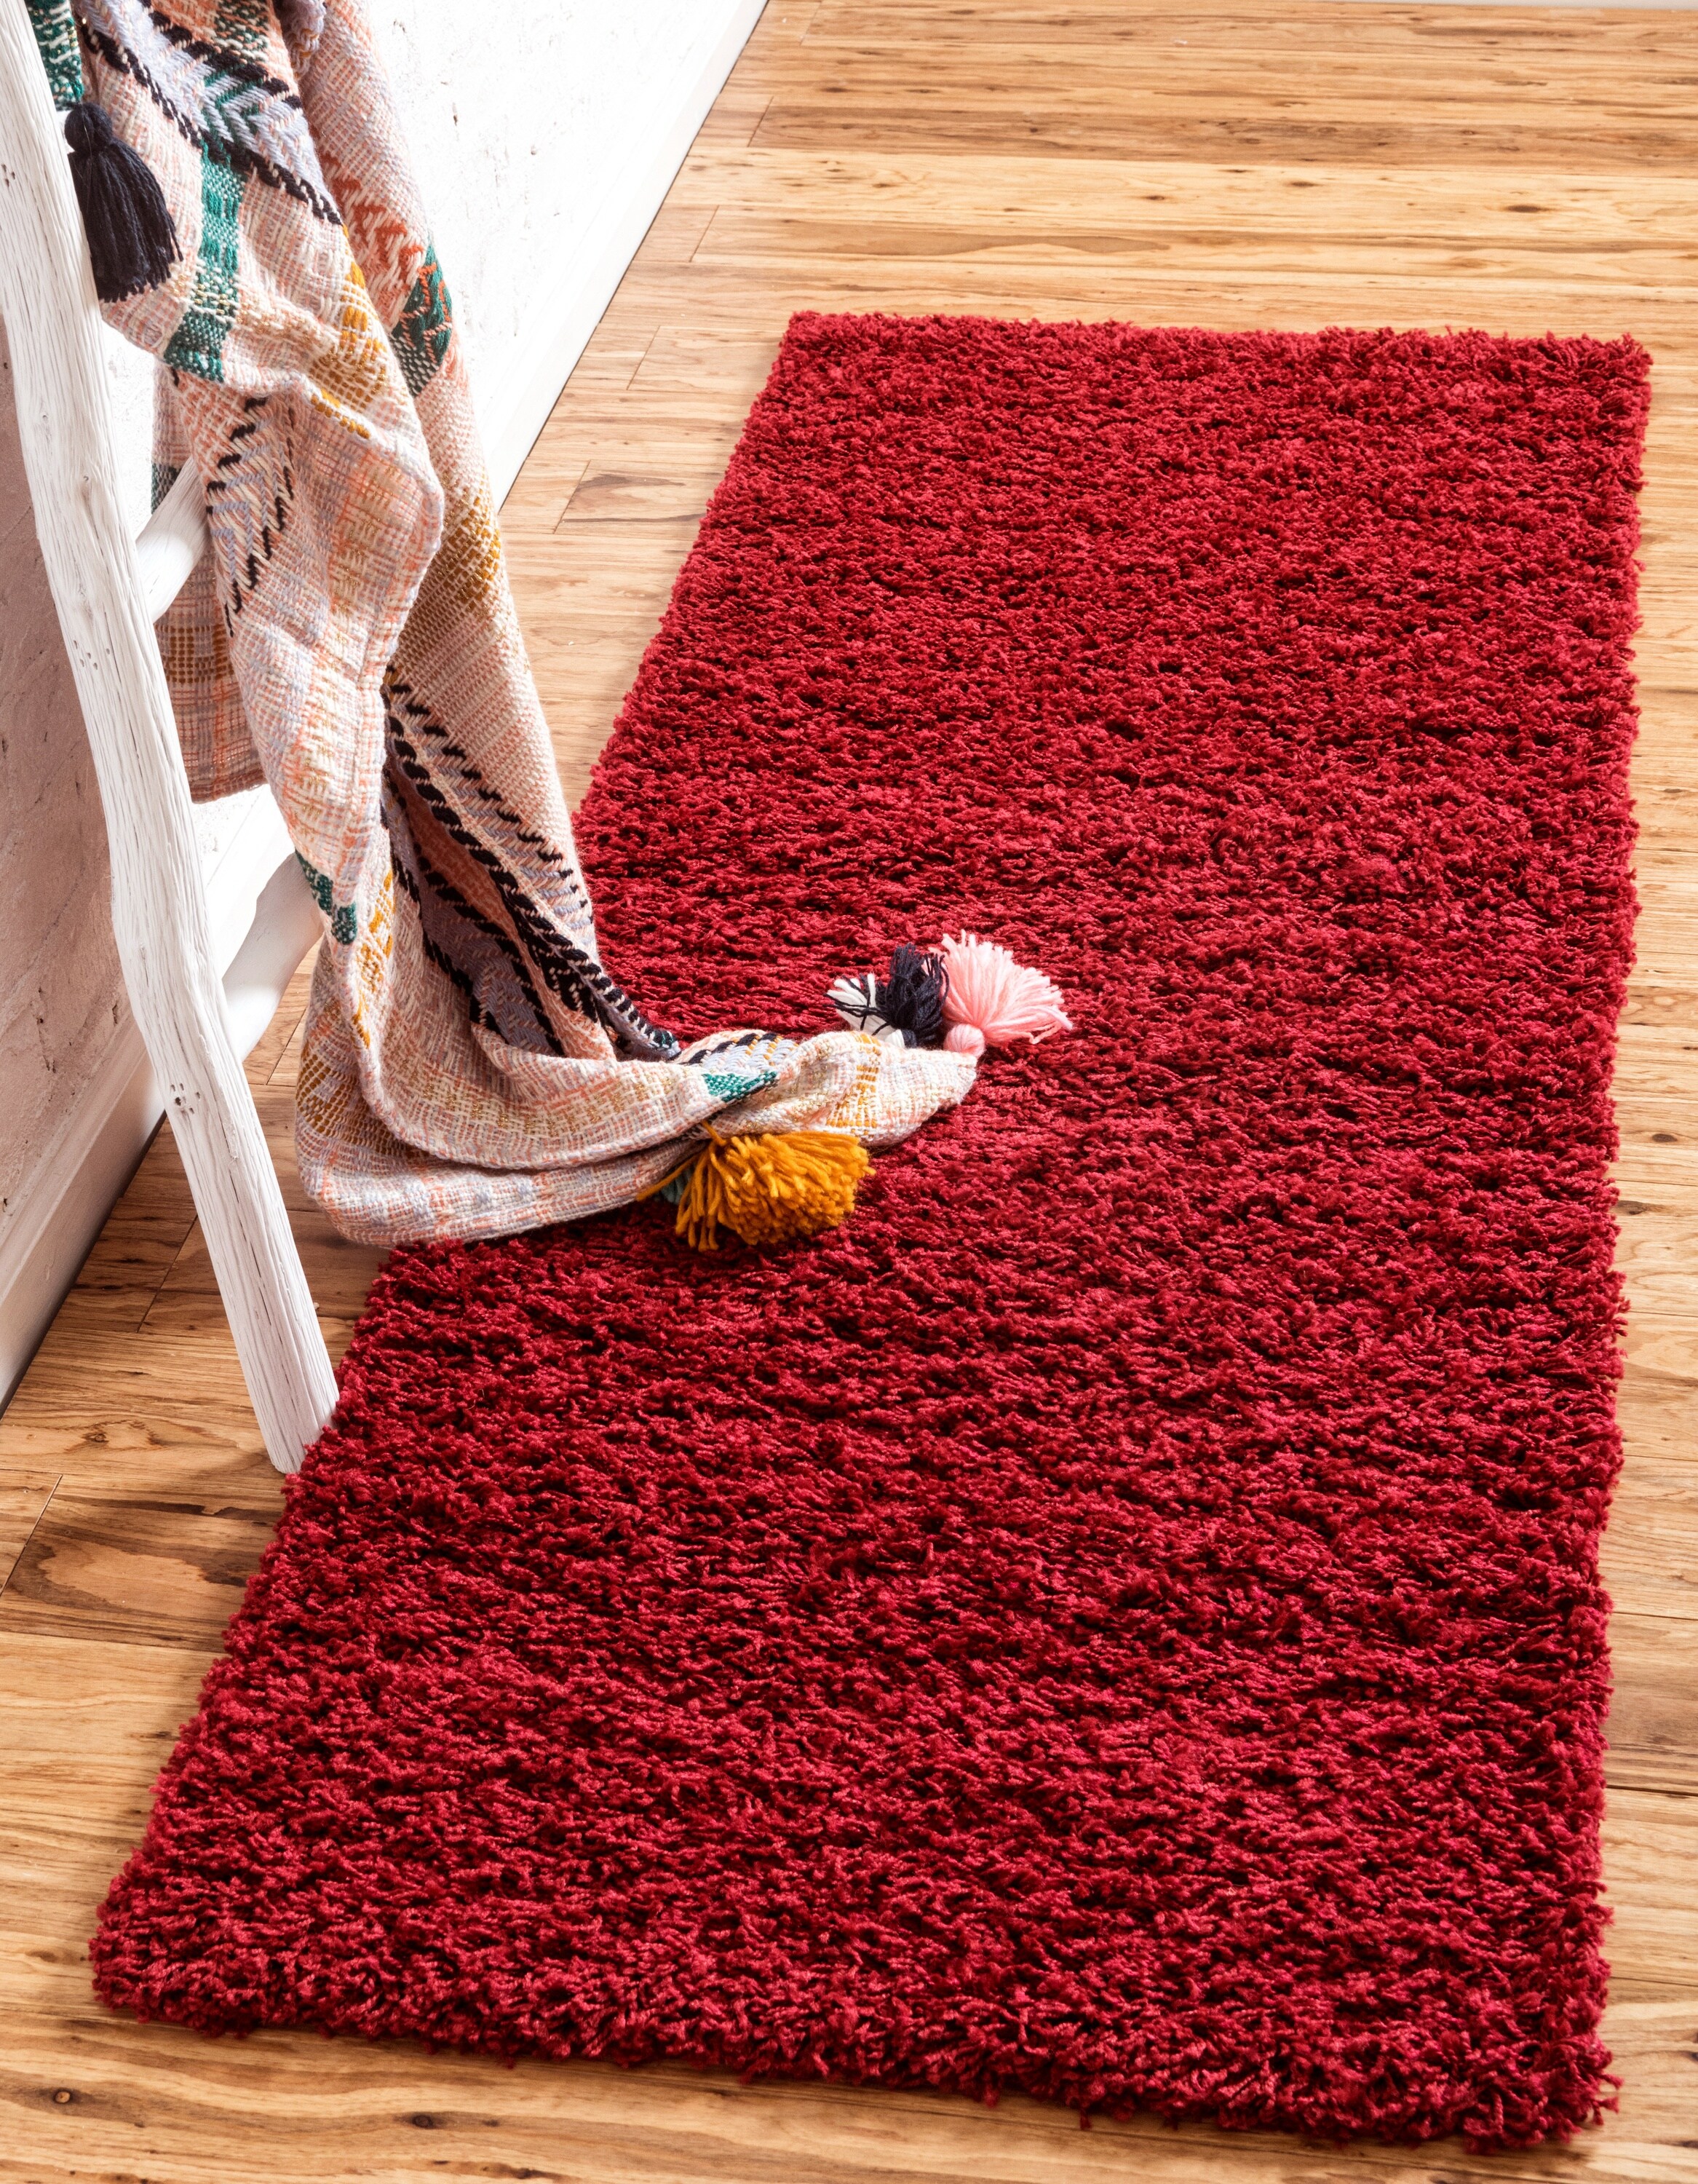 Unique Loom Solid Shag Cherry Red 10 ft. Runner Rug